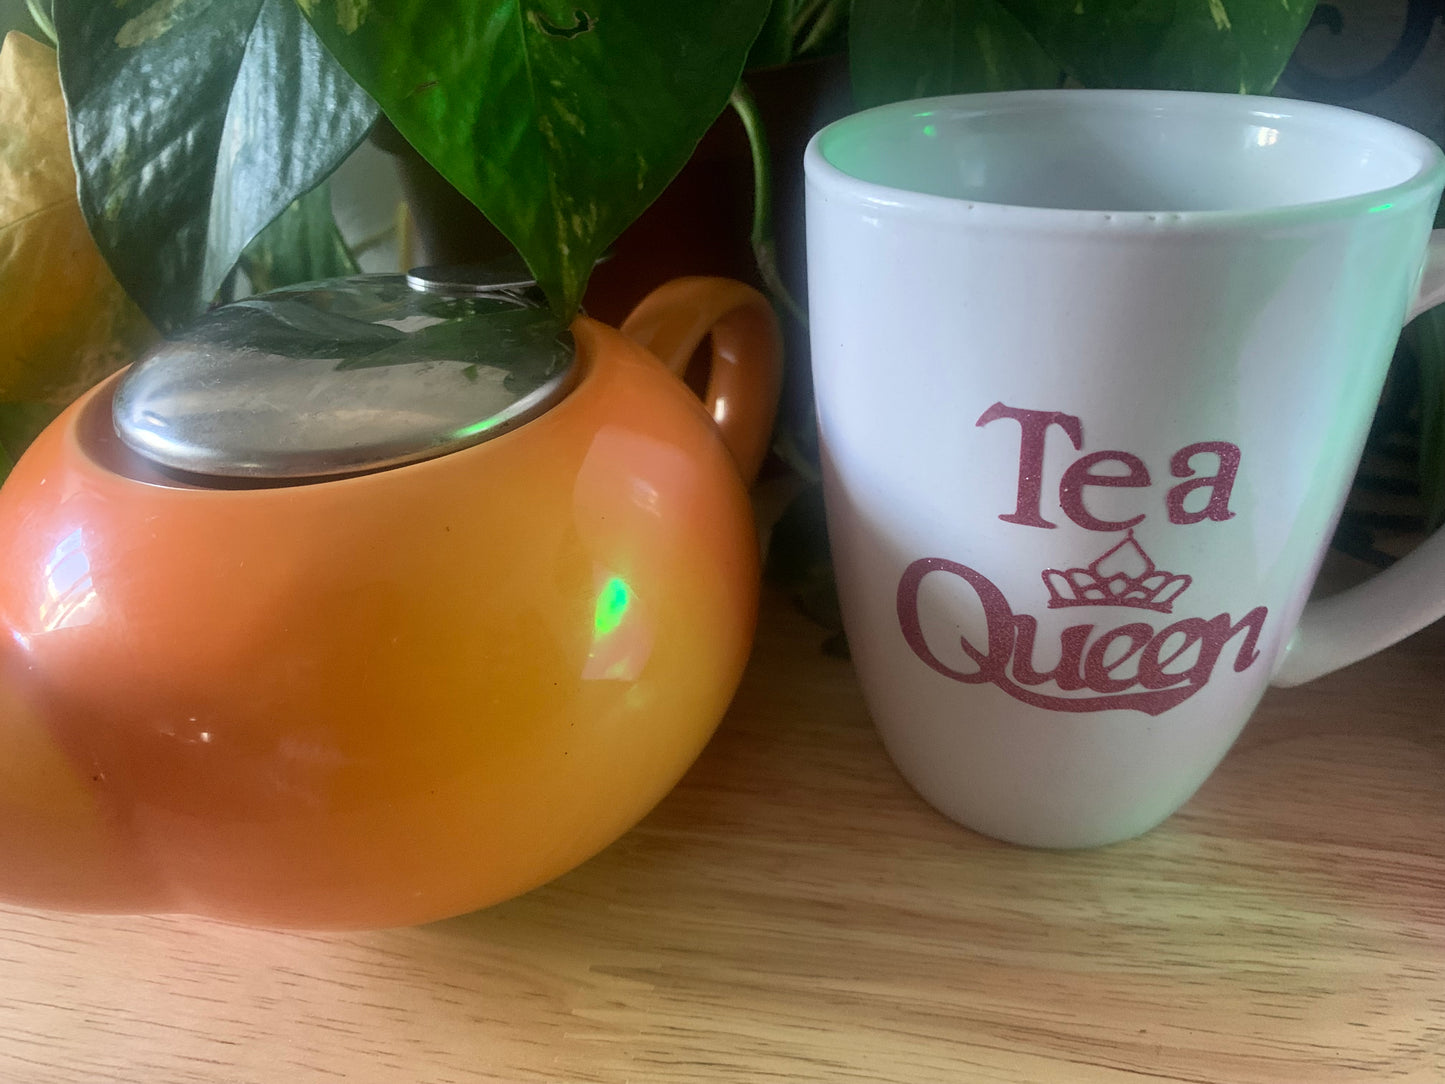 "Tea Queen" 4 different mood support teas by Yogi  and a 8oz mug